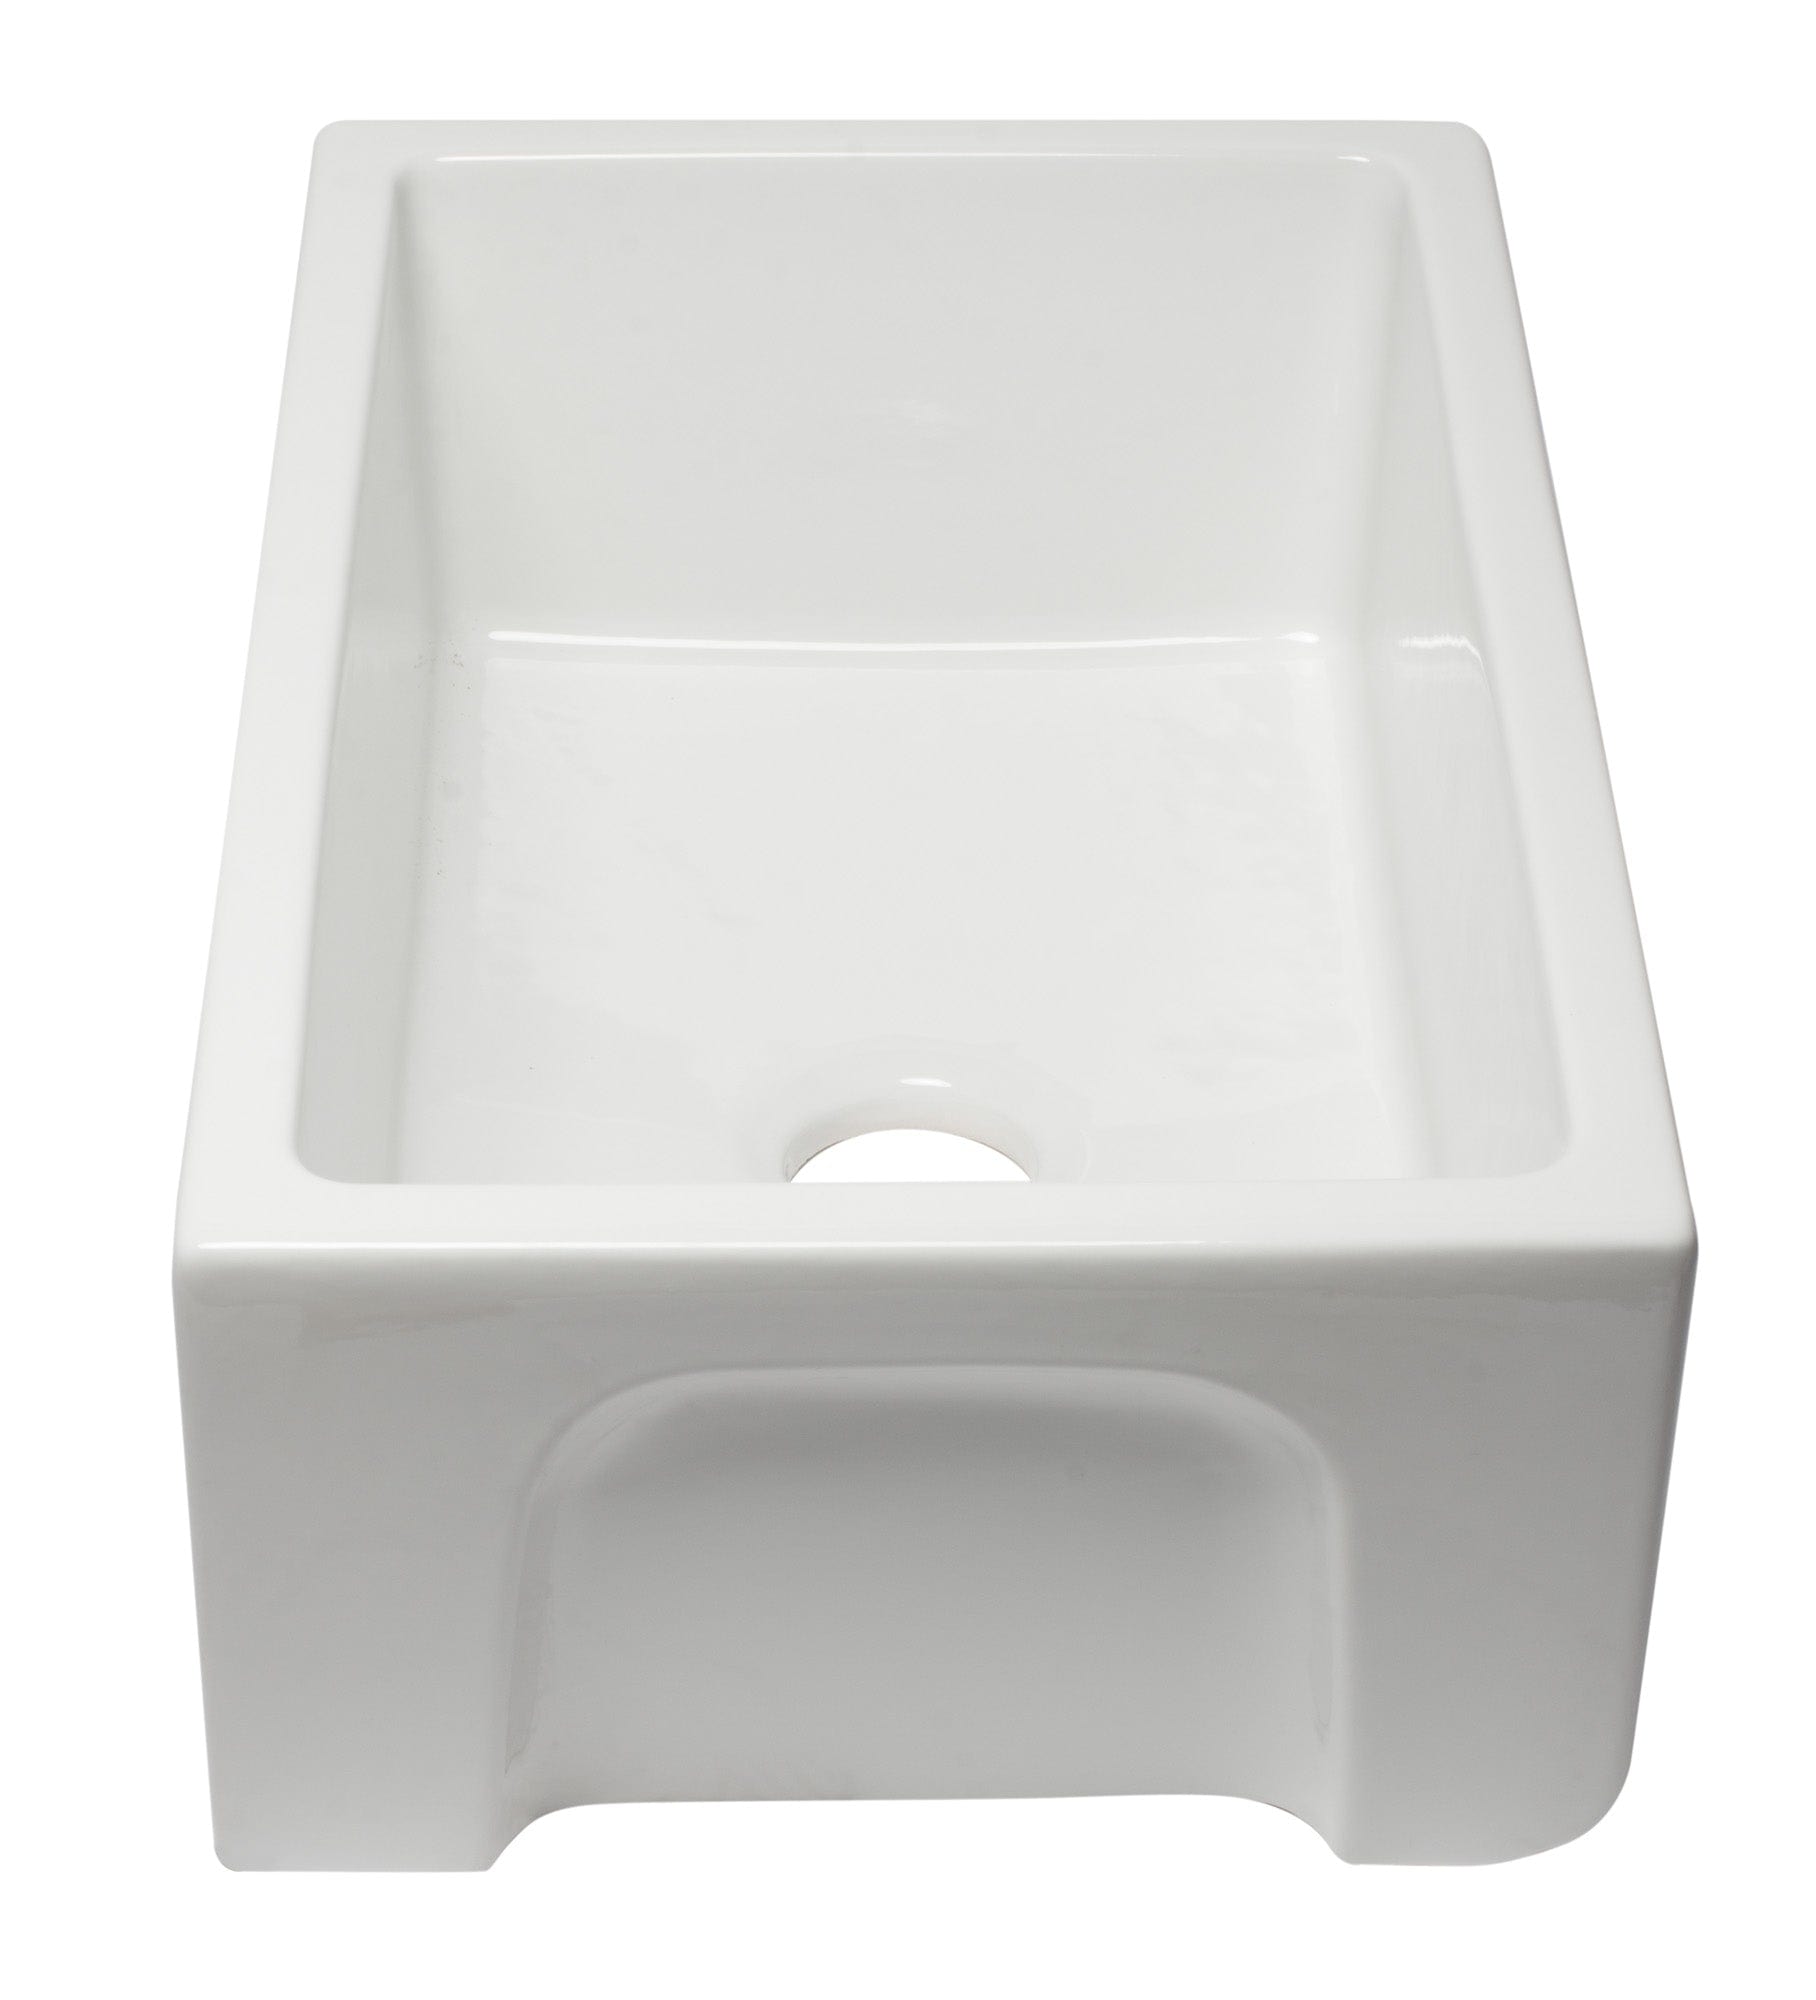 ALFI 30" White Reversible Smooth / Fluted Single Bowl Fireclay Farm Sink AB3018HS-W